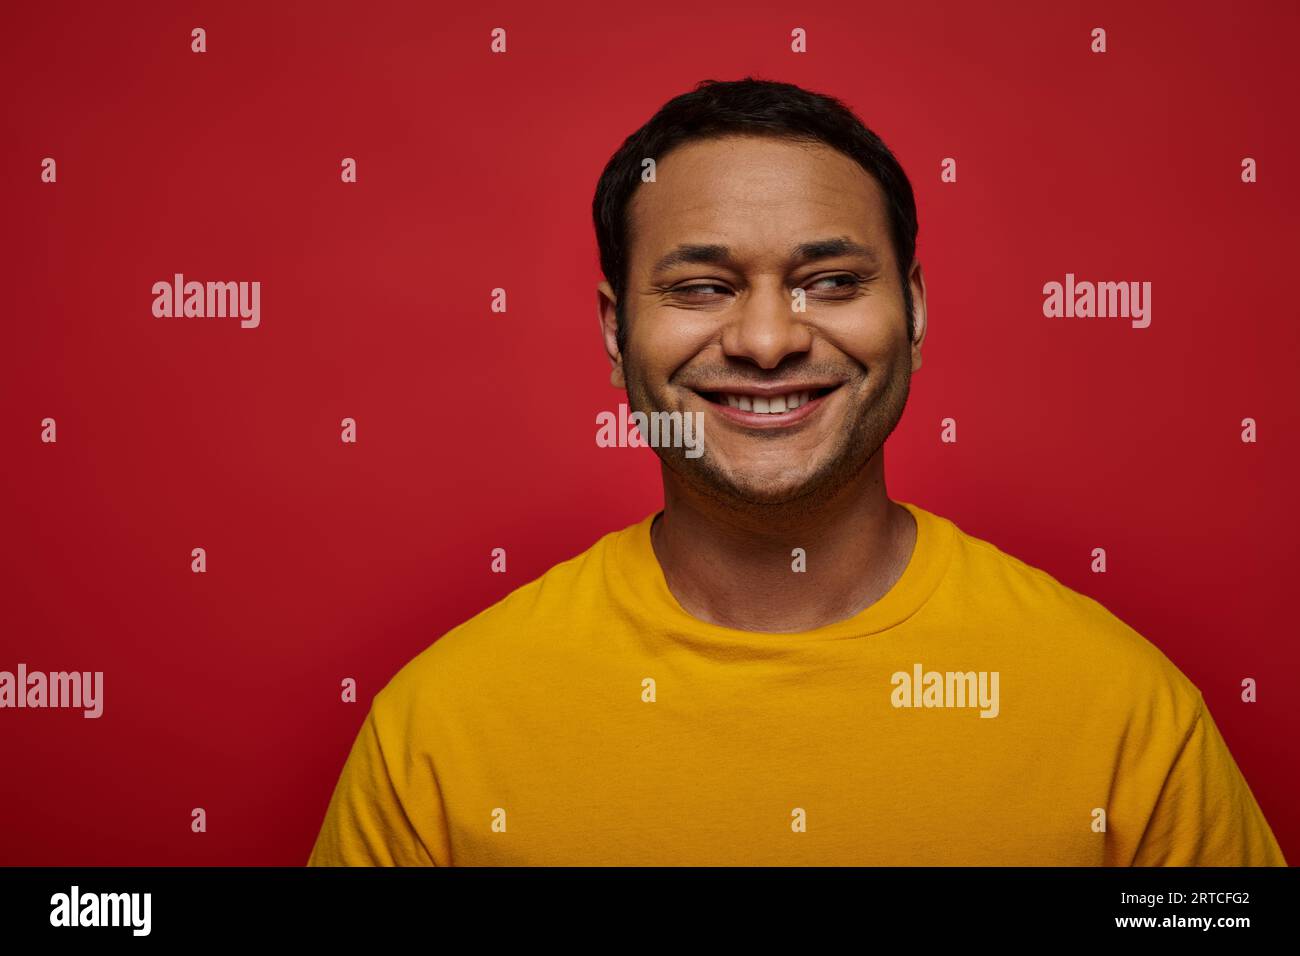 sly indian man in bright yellow clothes looking away and smiling on red background, side glance Stock Photo